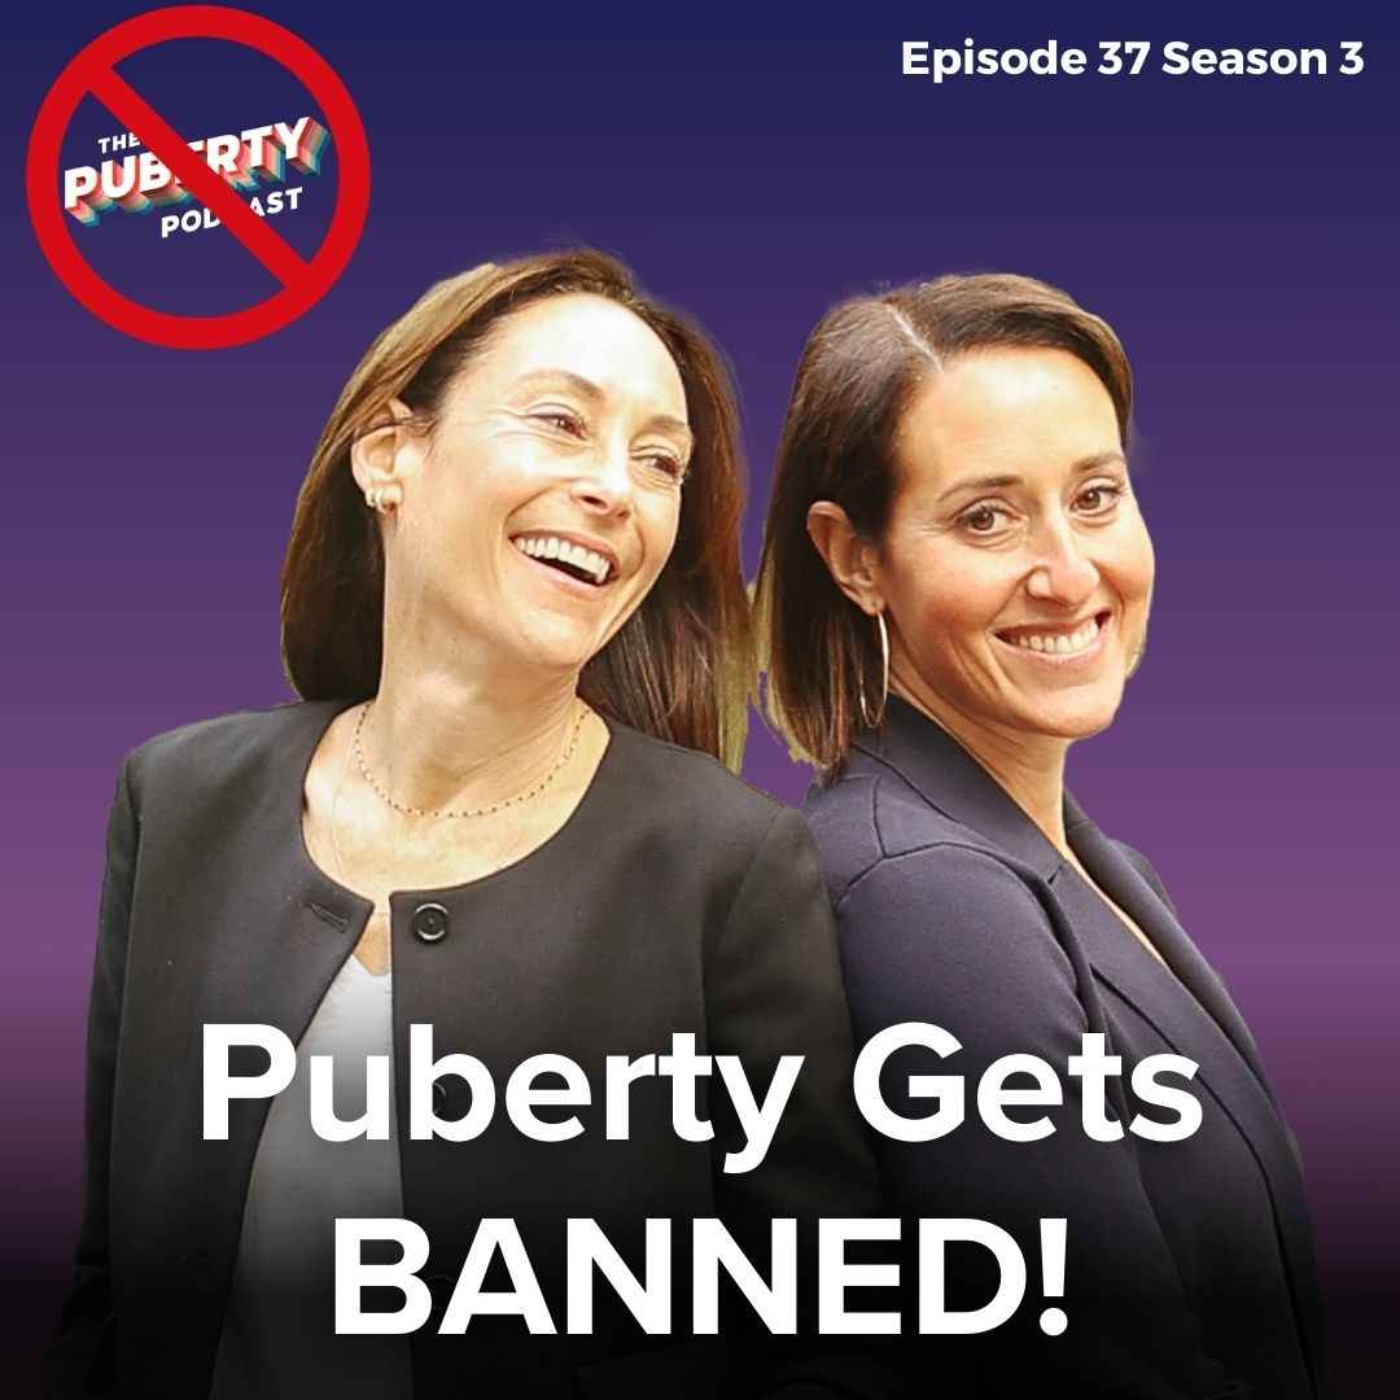 Puberty Gets BANNED!